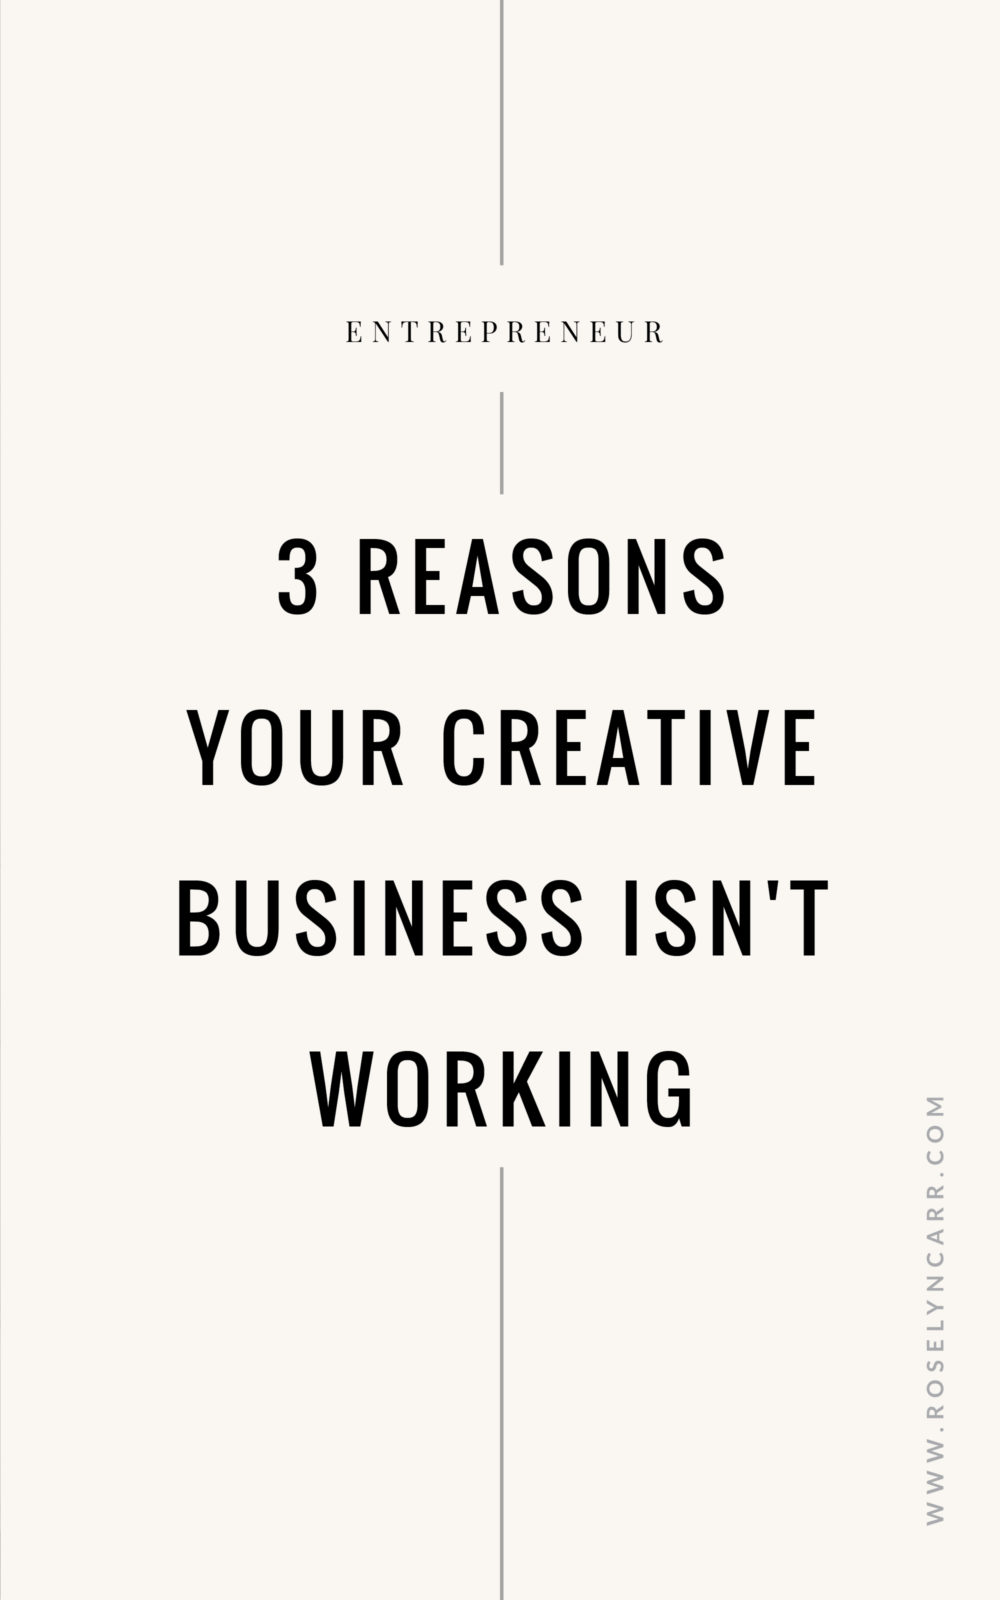 3 reasons your creative business isn't working